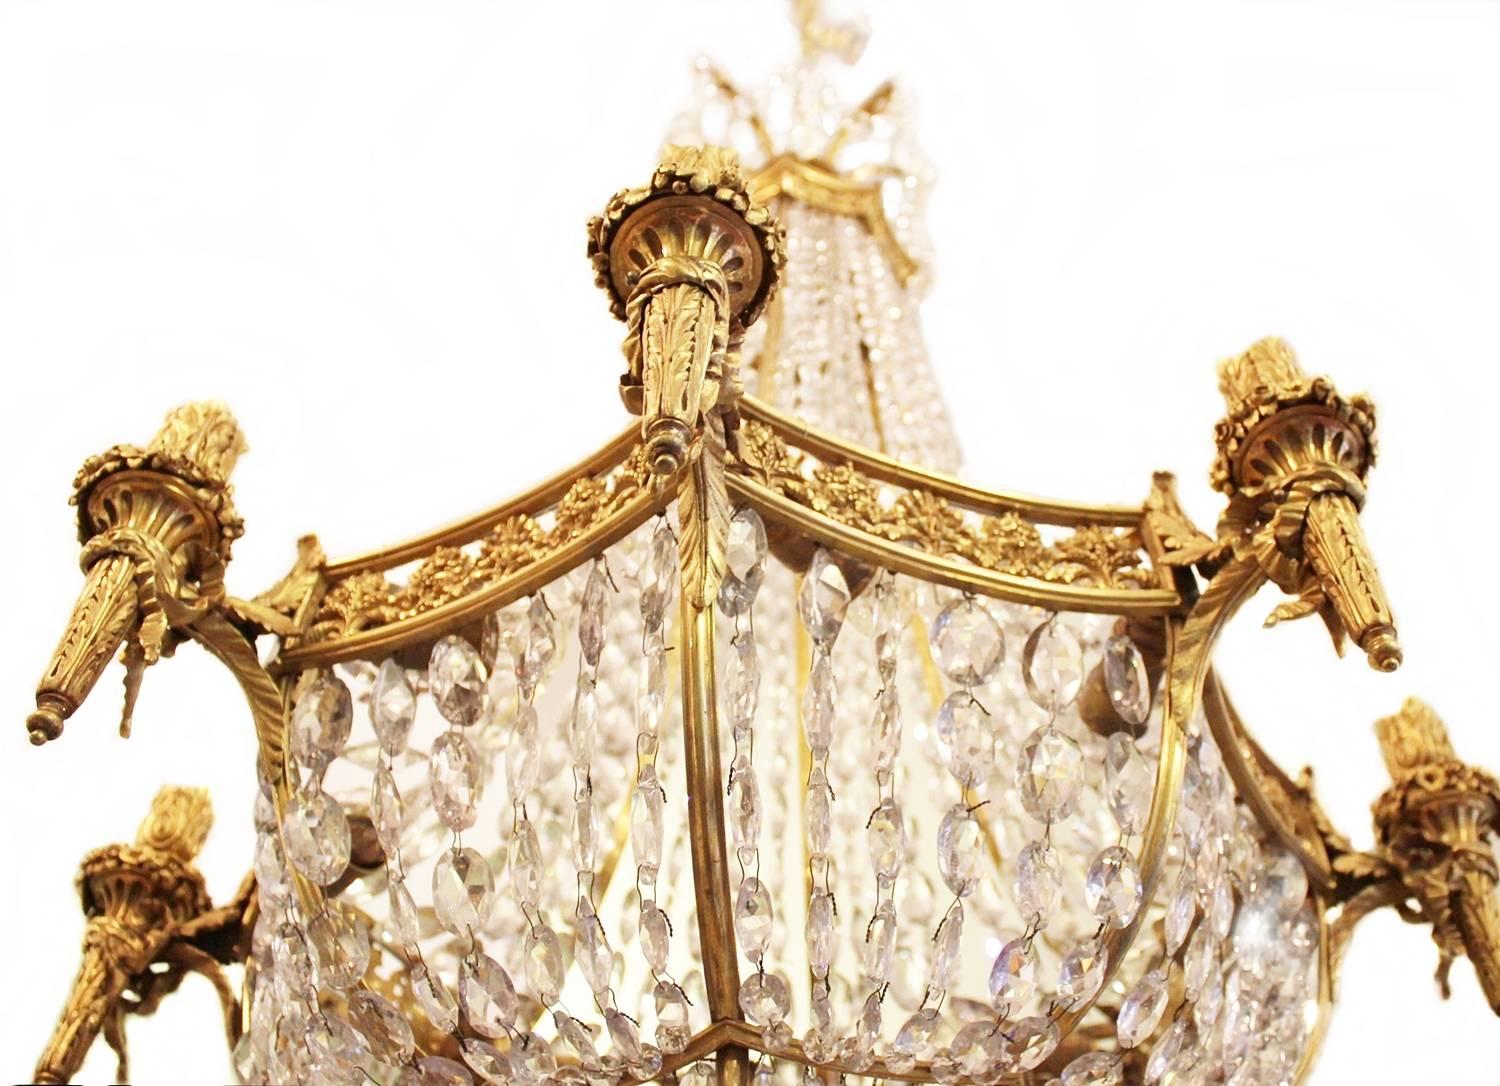 This chandelier is of extremely high quality with a richly embellished and worked frame that boasts first class casting. The chandeliers candlearms is in the form of torches and are covered with a plentiful amount of Fine prisms. It is made in